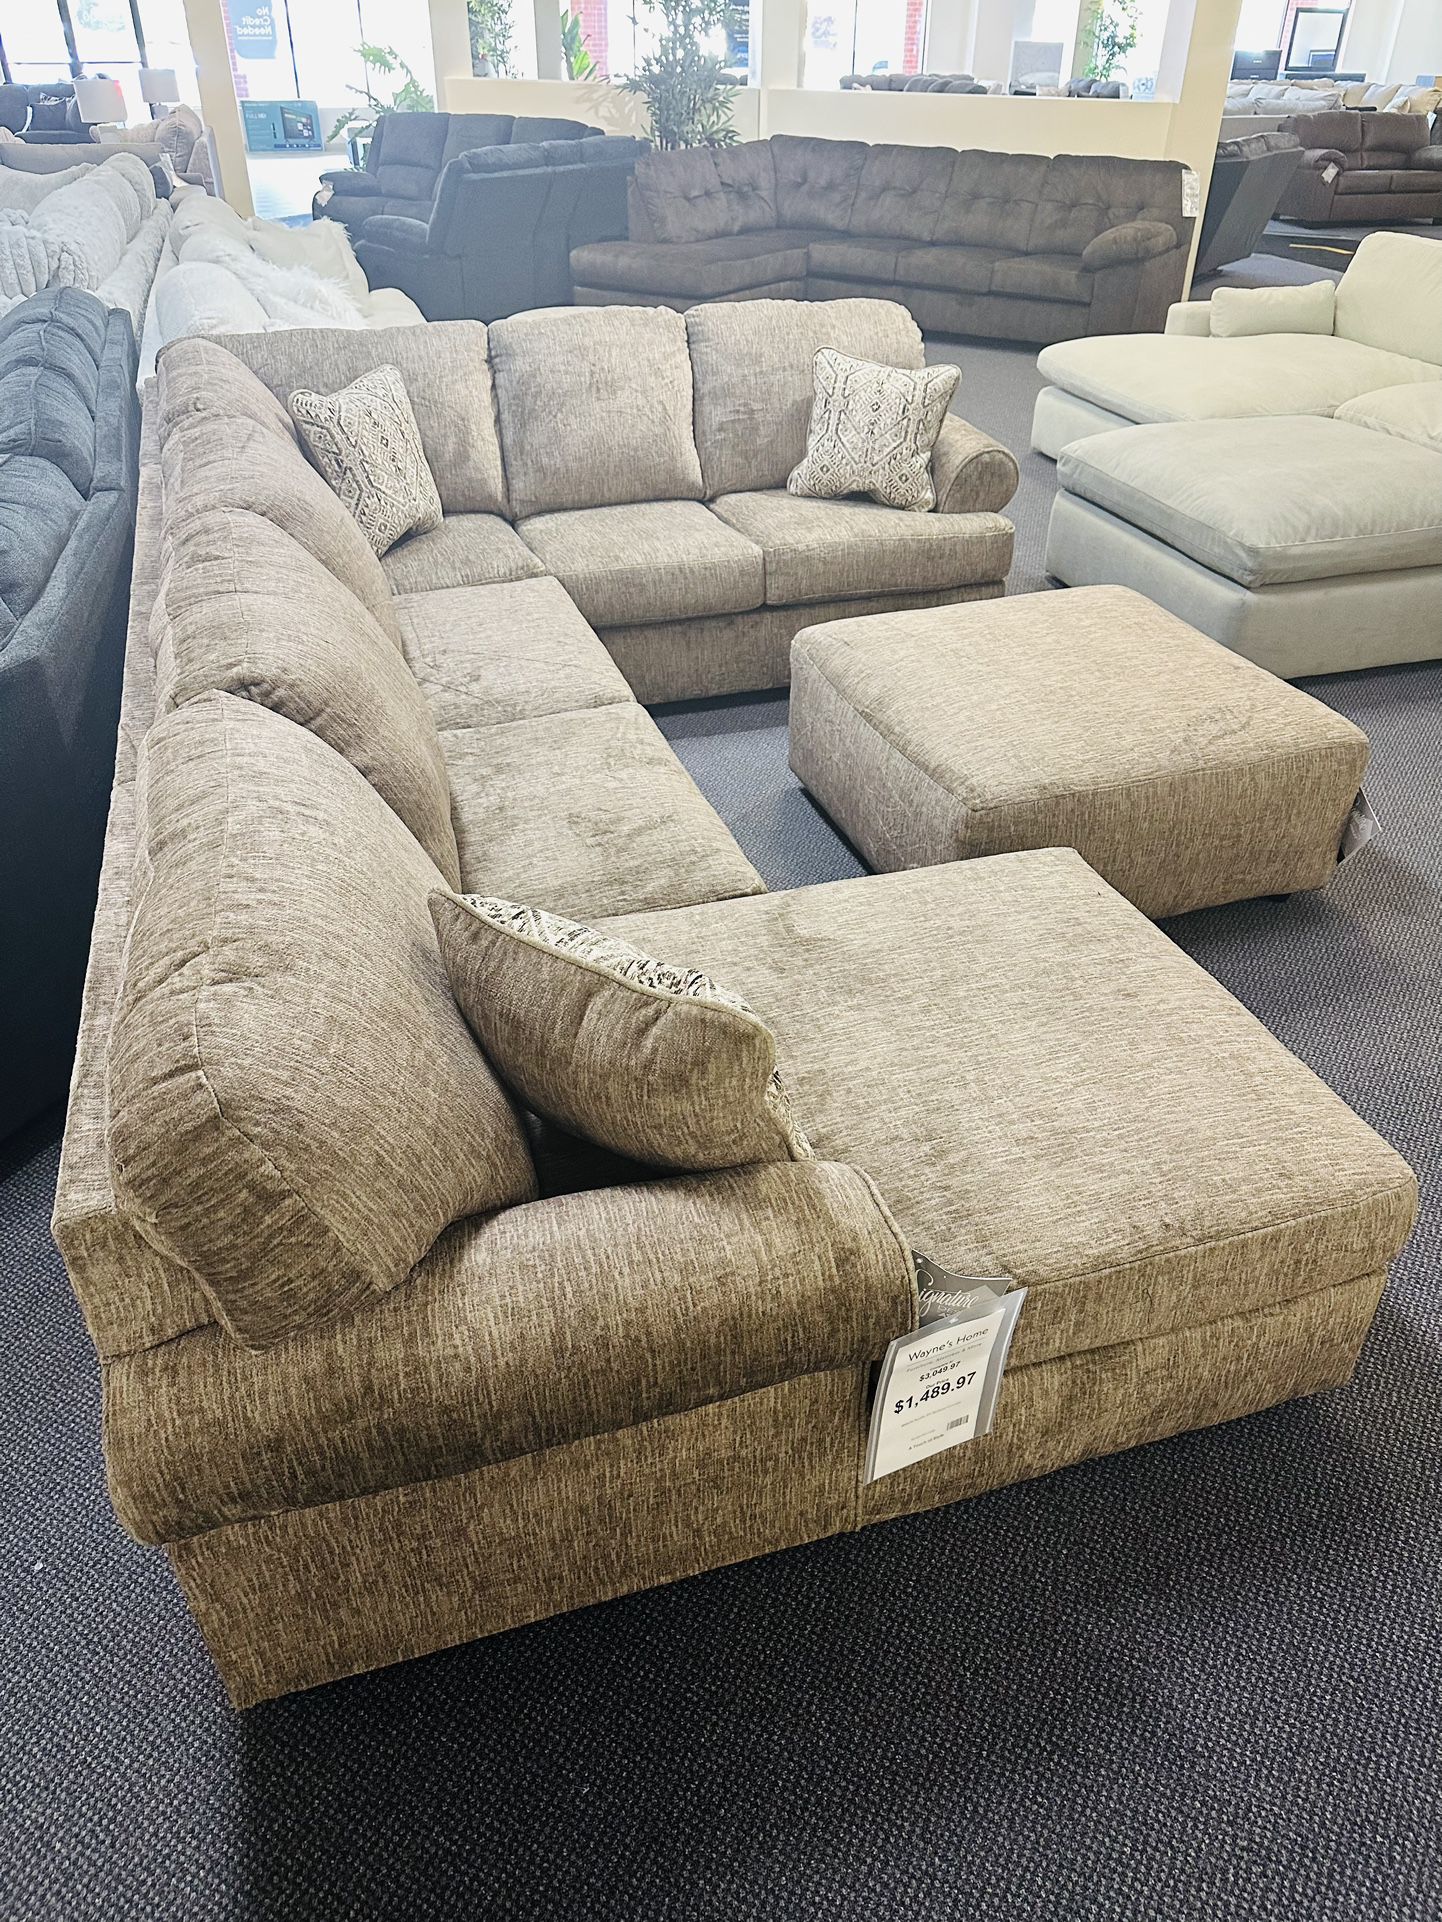 Brand New 3 Pcs Sectional With Ottoman 